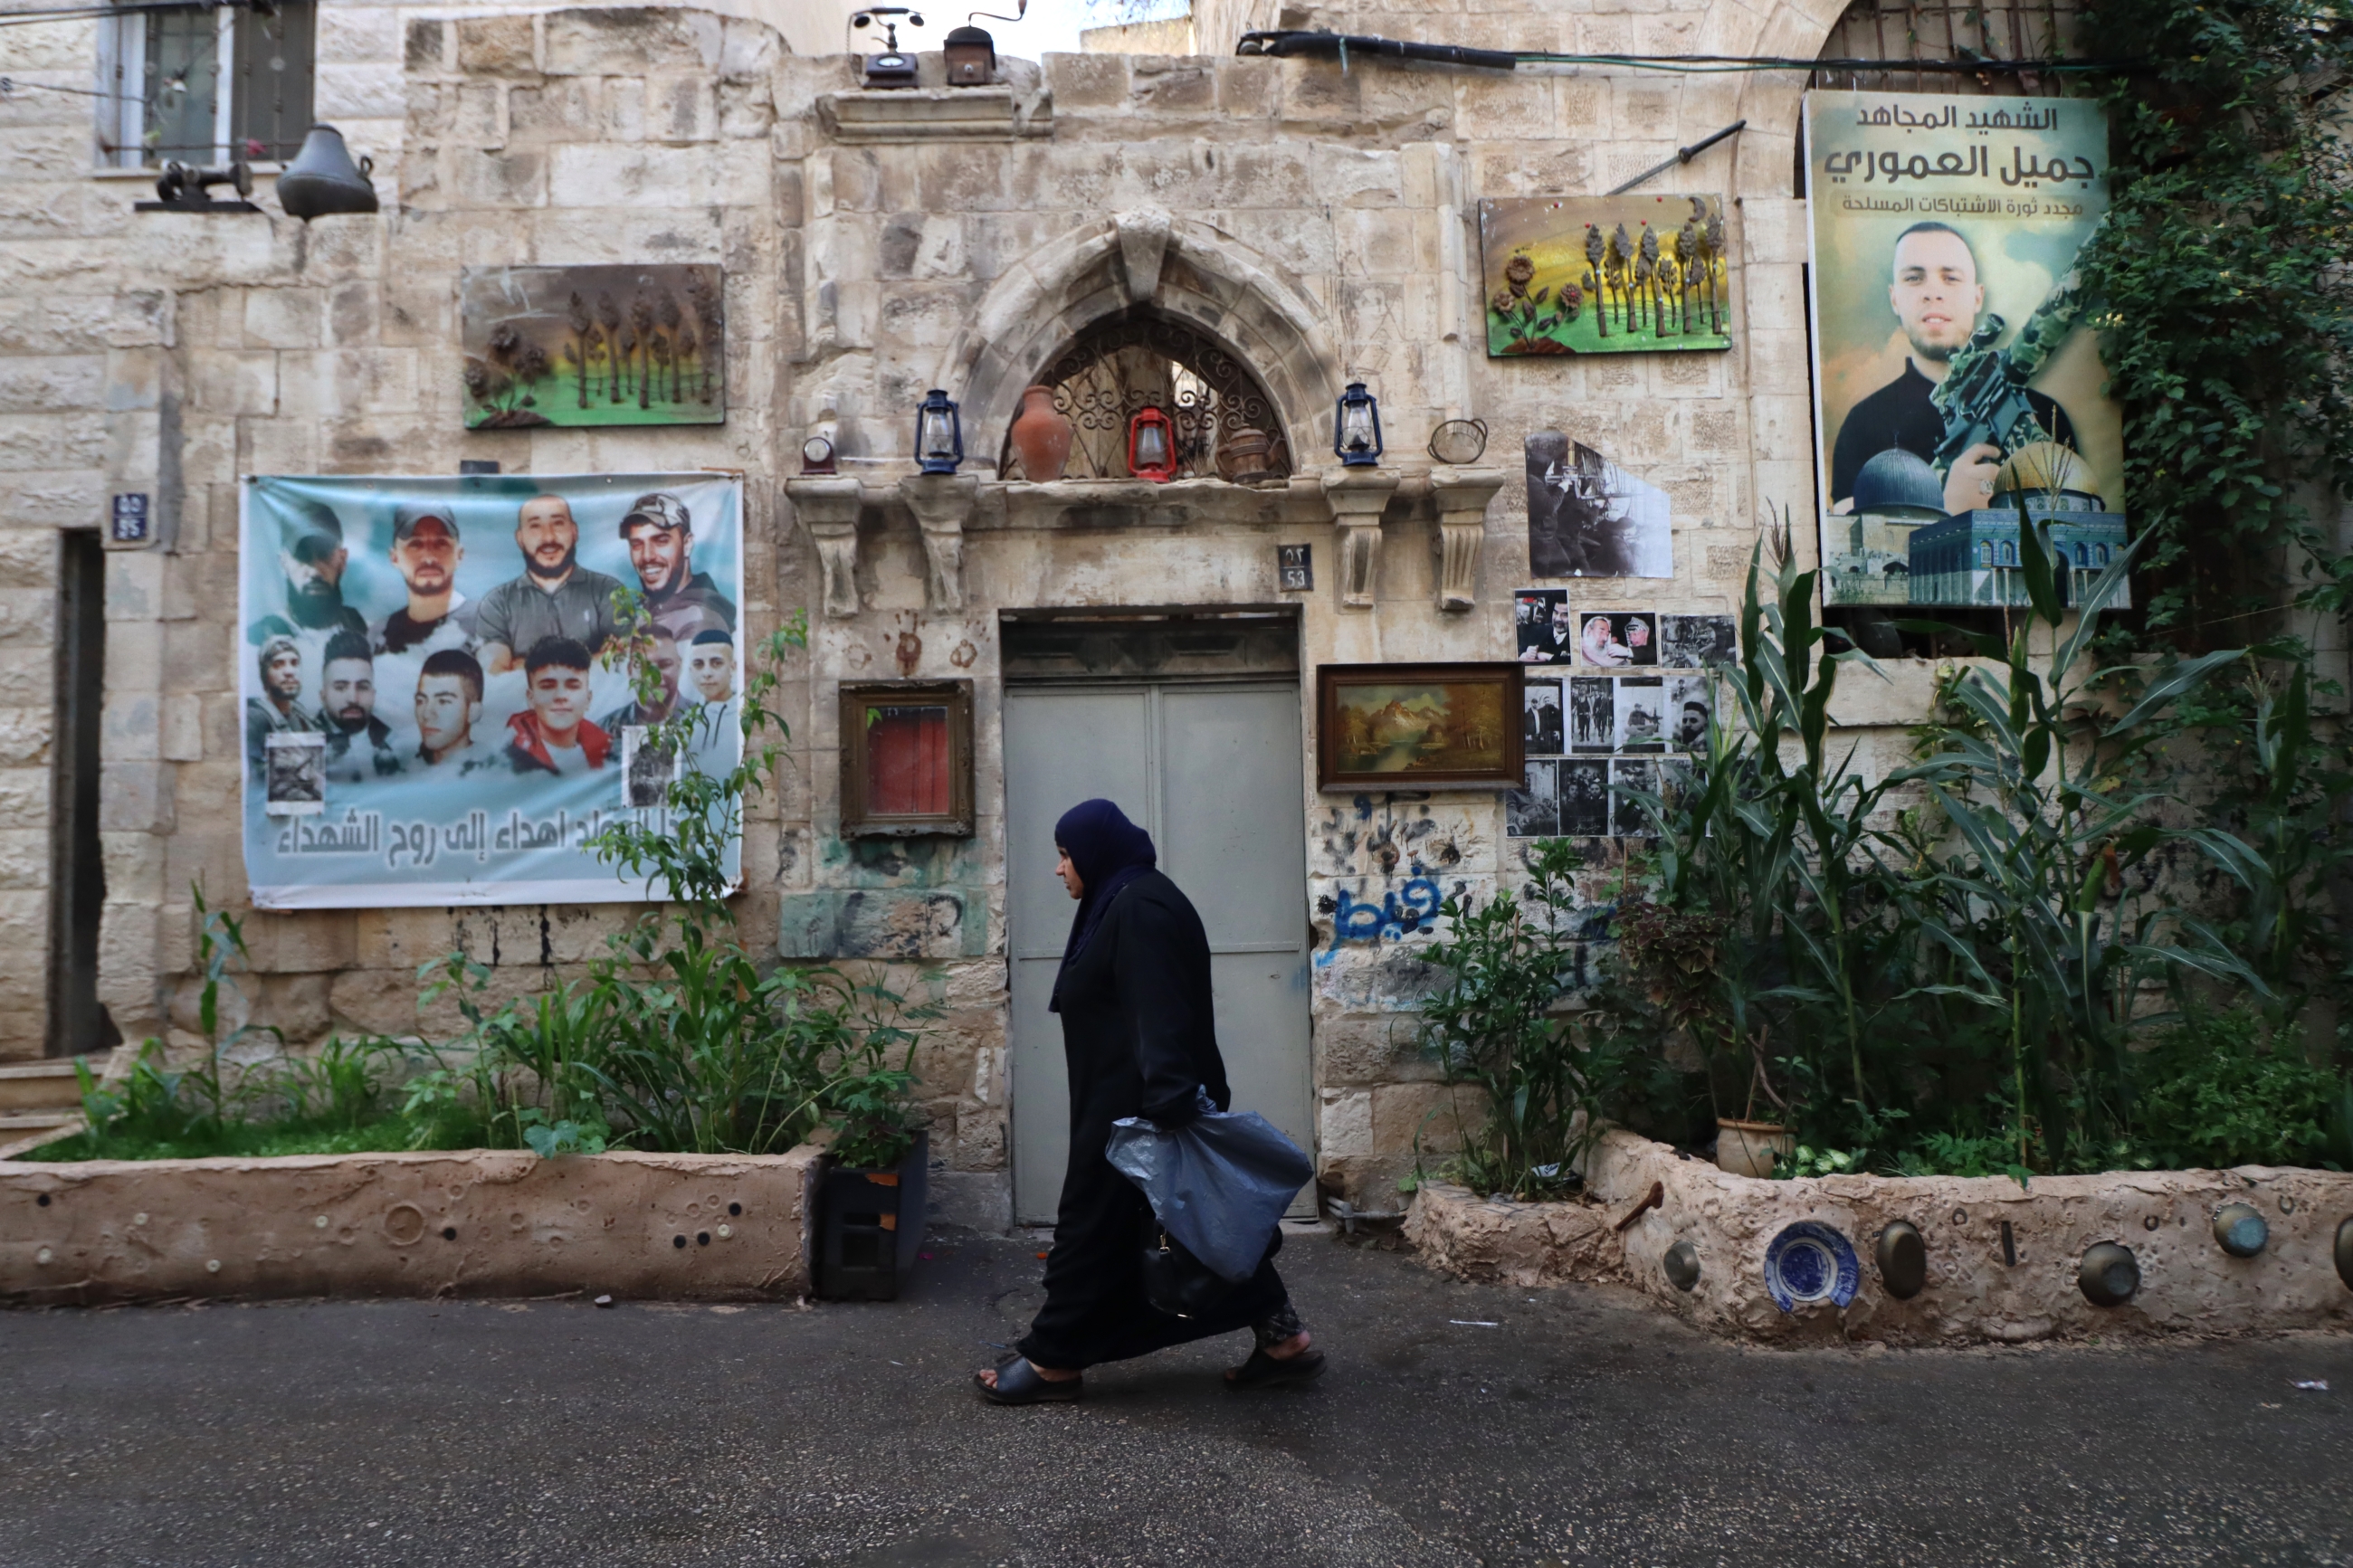 A Palestinian woman passes by photos of Nablus and Jenin fighters recently killed by the Israeli military, in Nablus' Old Town in the occupied West Bank on 9 November 2022 (MEE/Ahmad Al-Bazz)